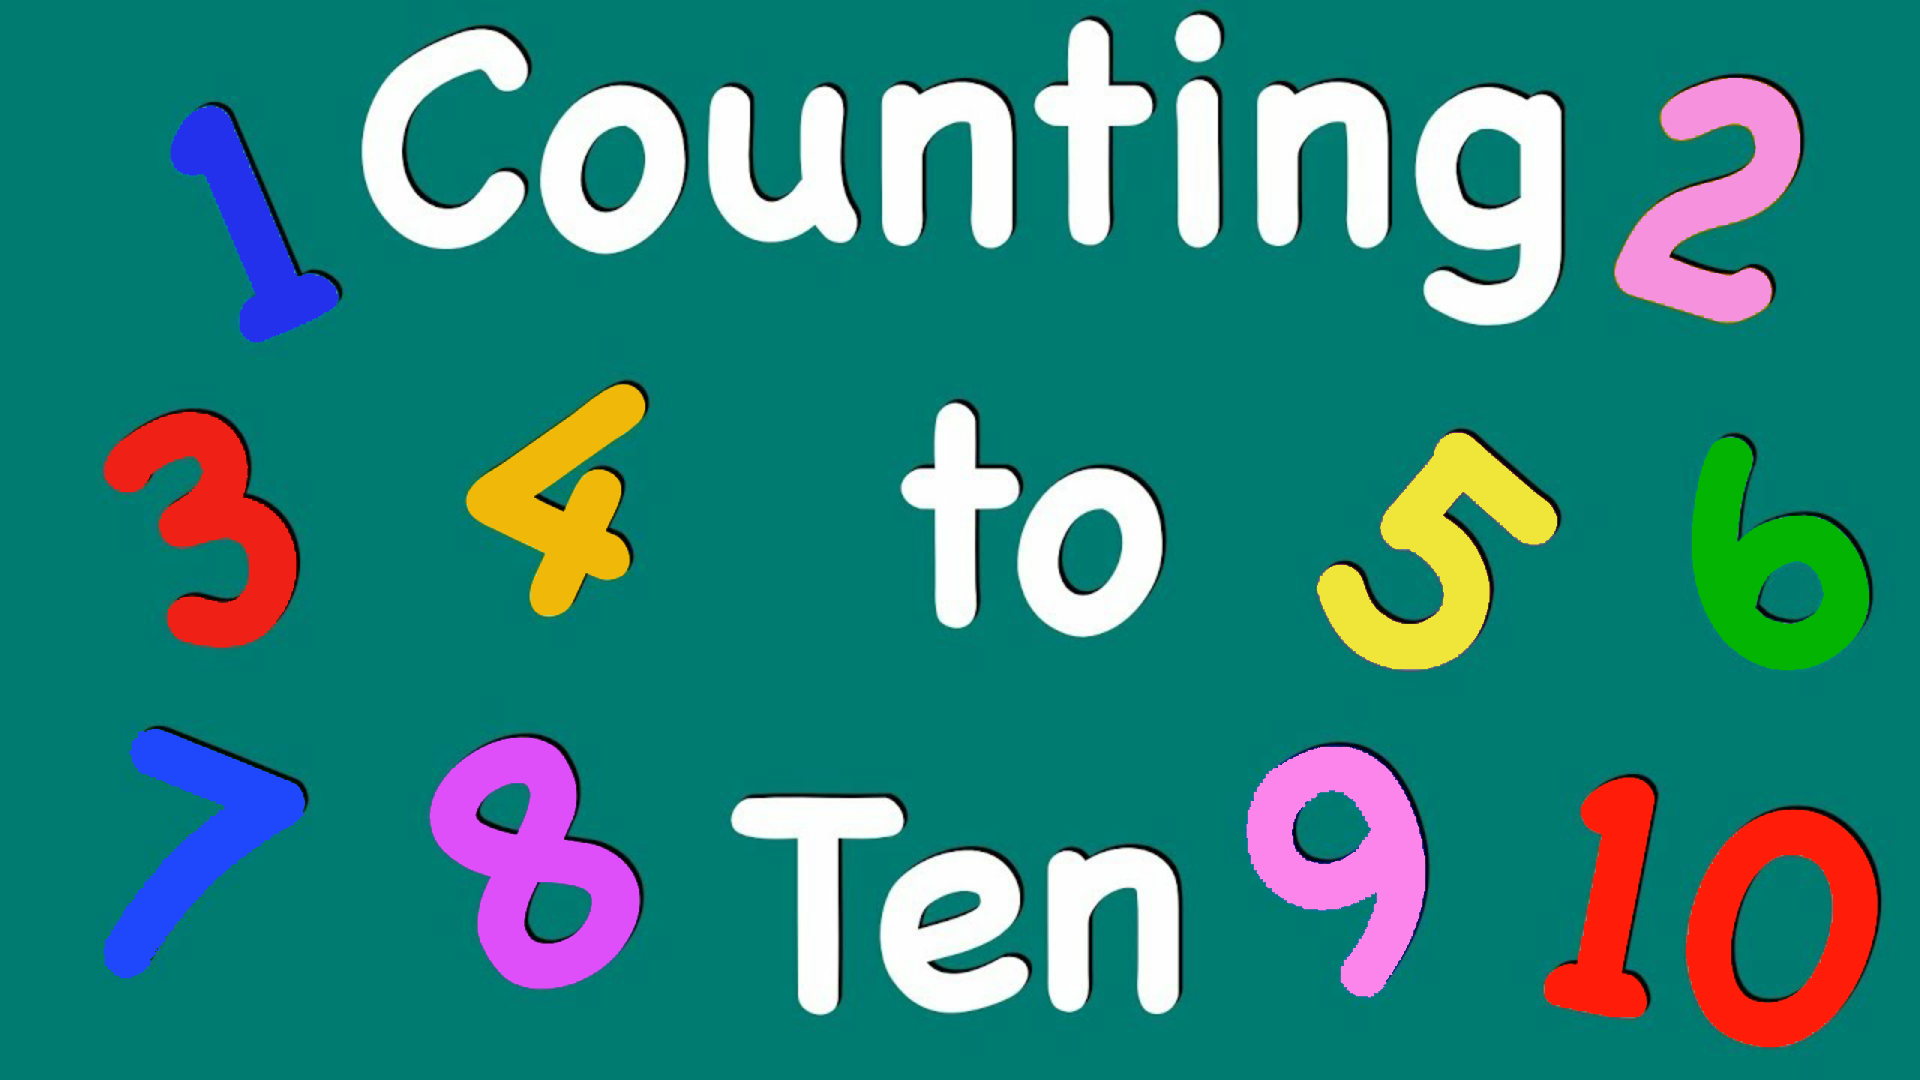 count-ng-to-ten-number-recogn-t-on-1-10-for-k-ds-nursery-rhymes-fan